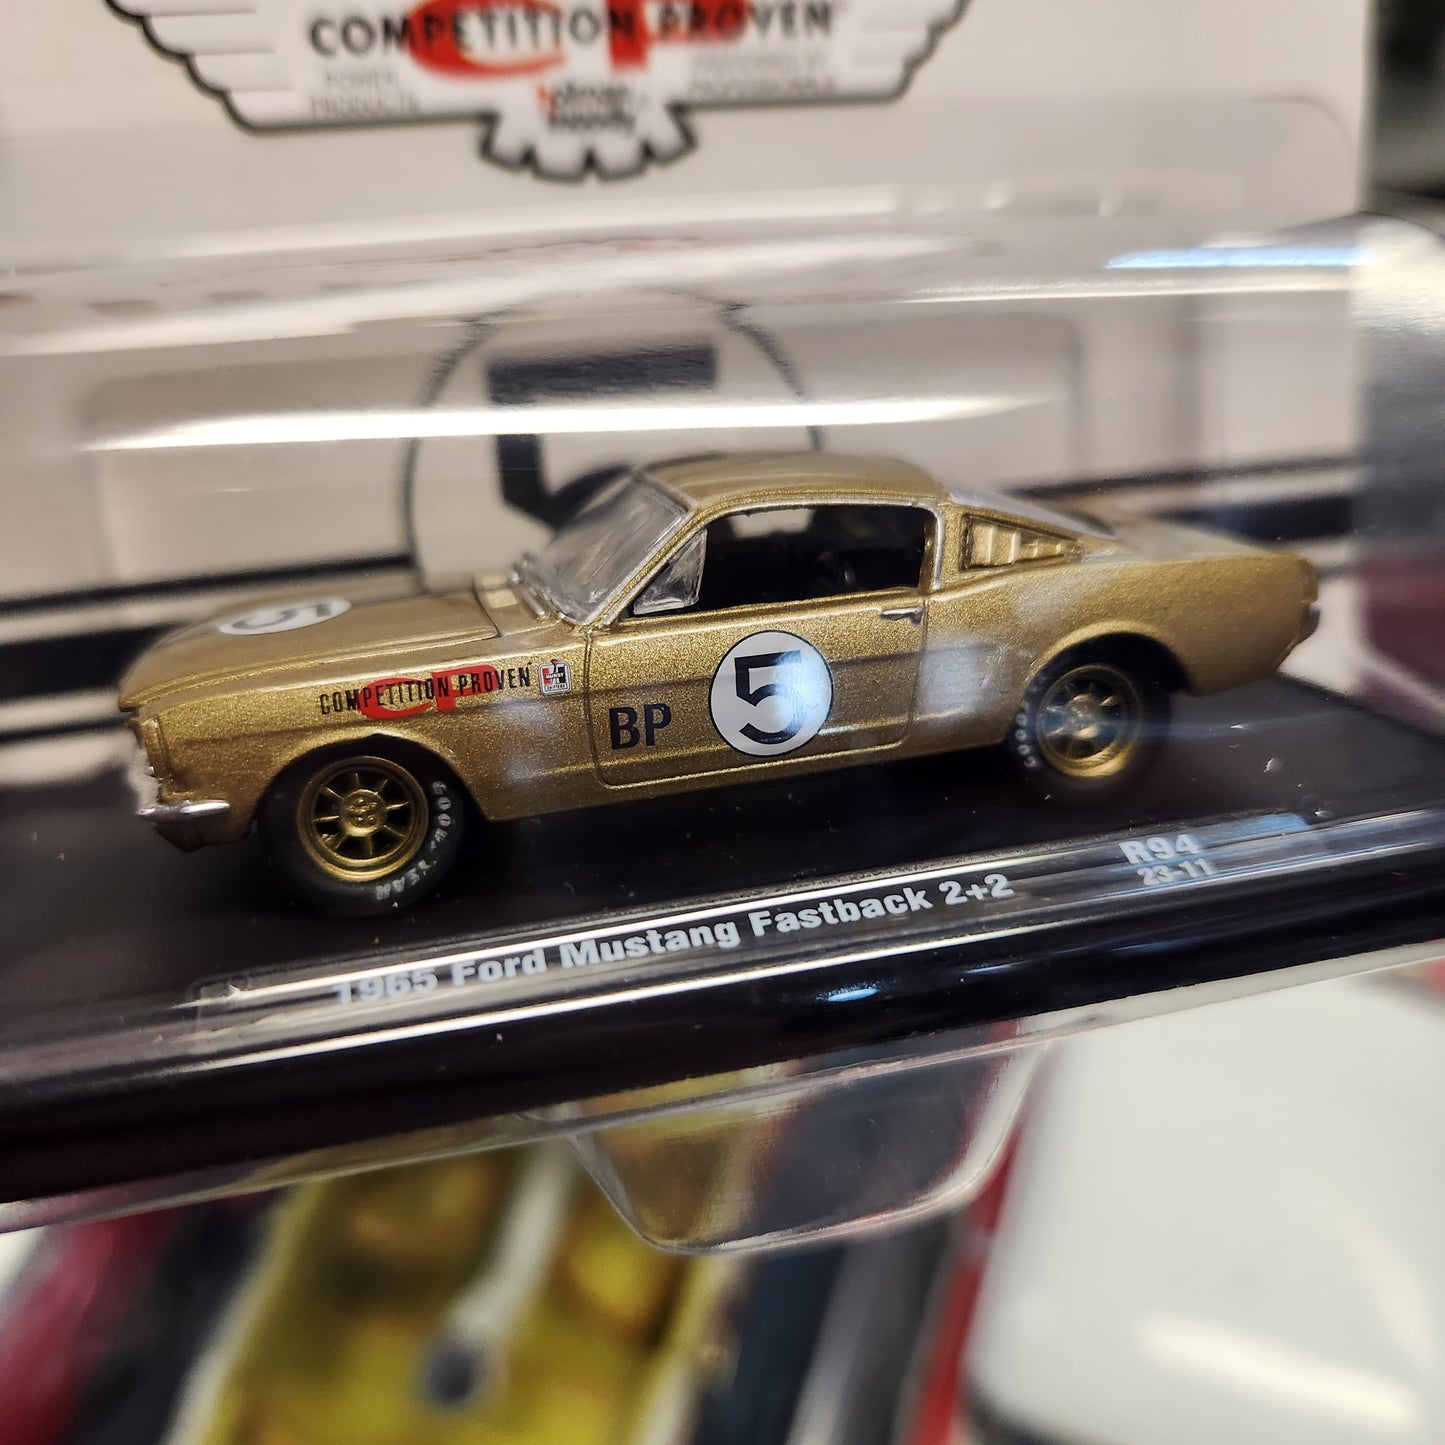 M2 Machines - 1965 Ford Mustang Fastback 2+2 - Gold